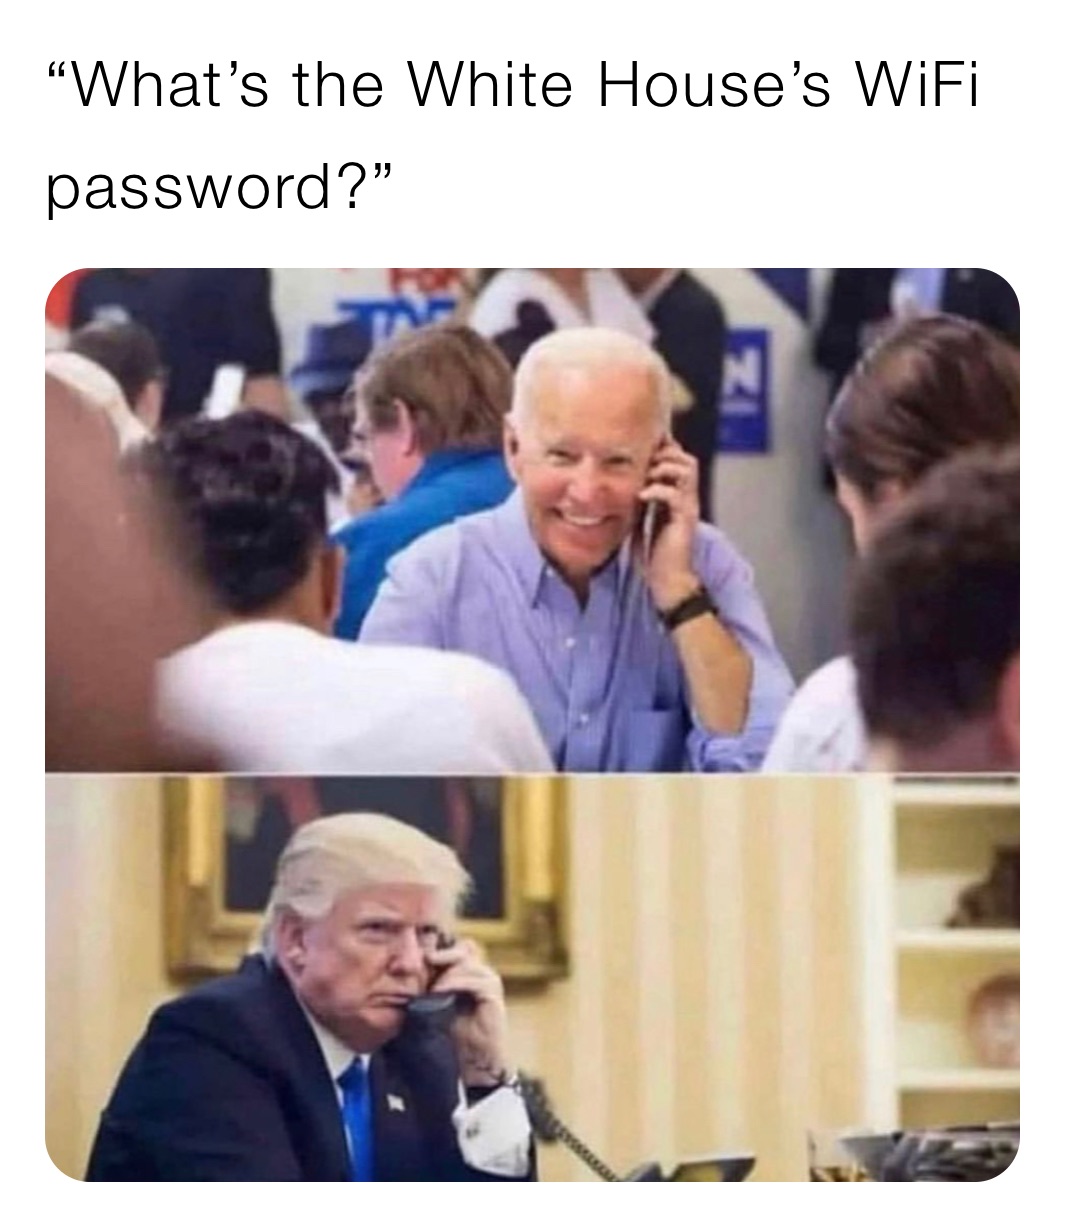 “What’s the White House’s WiFi password?”